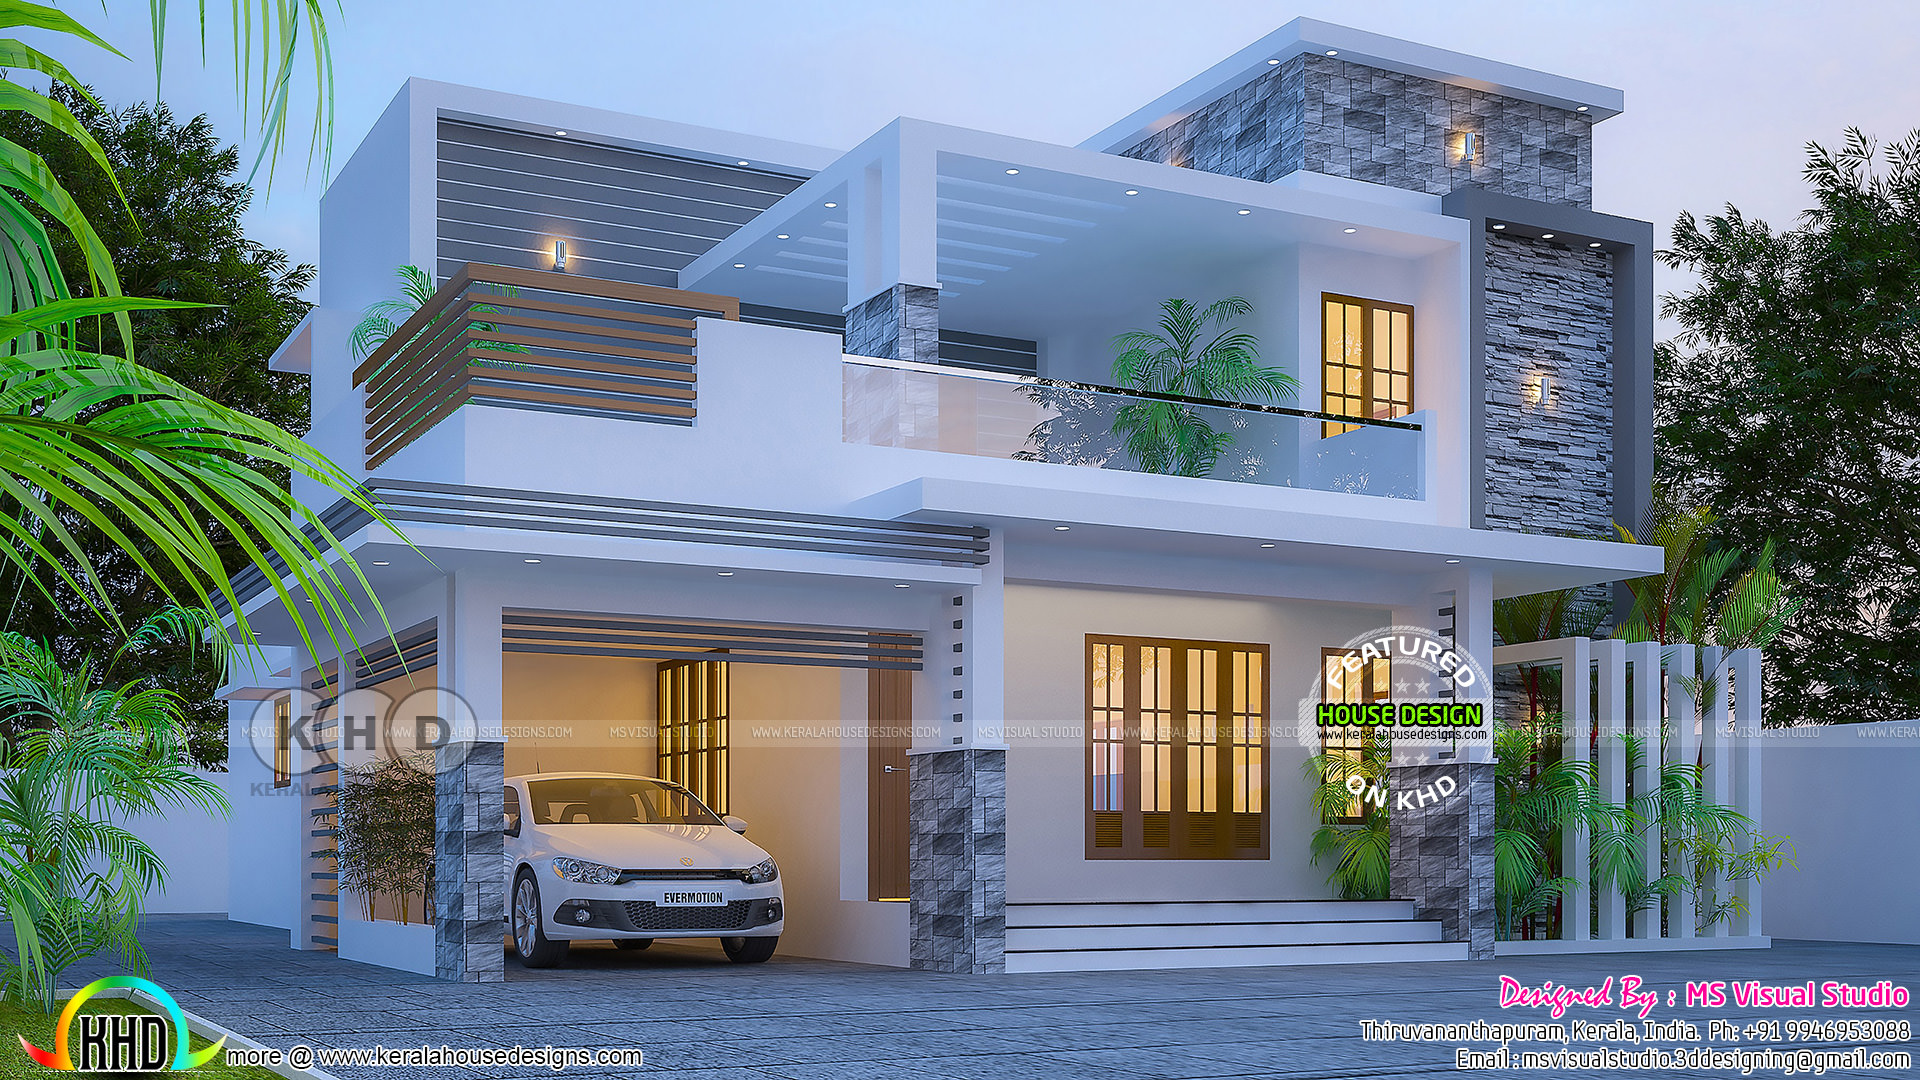 4 BHK stunning 2182 square feet home design - Kerala home design and